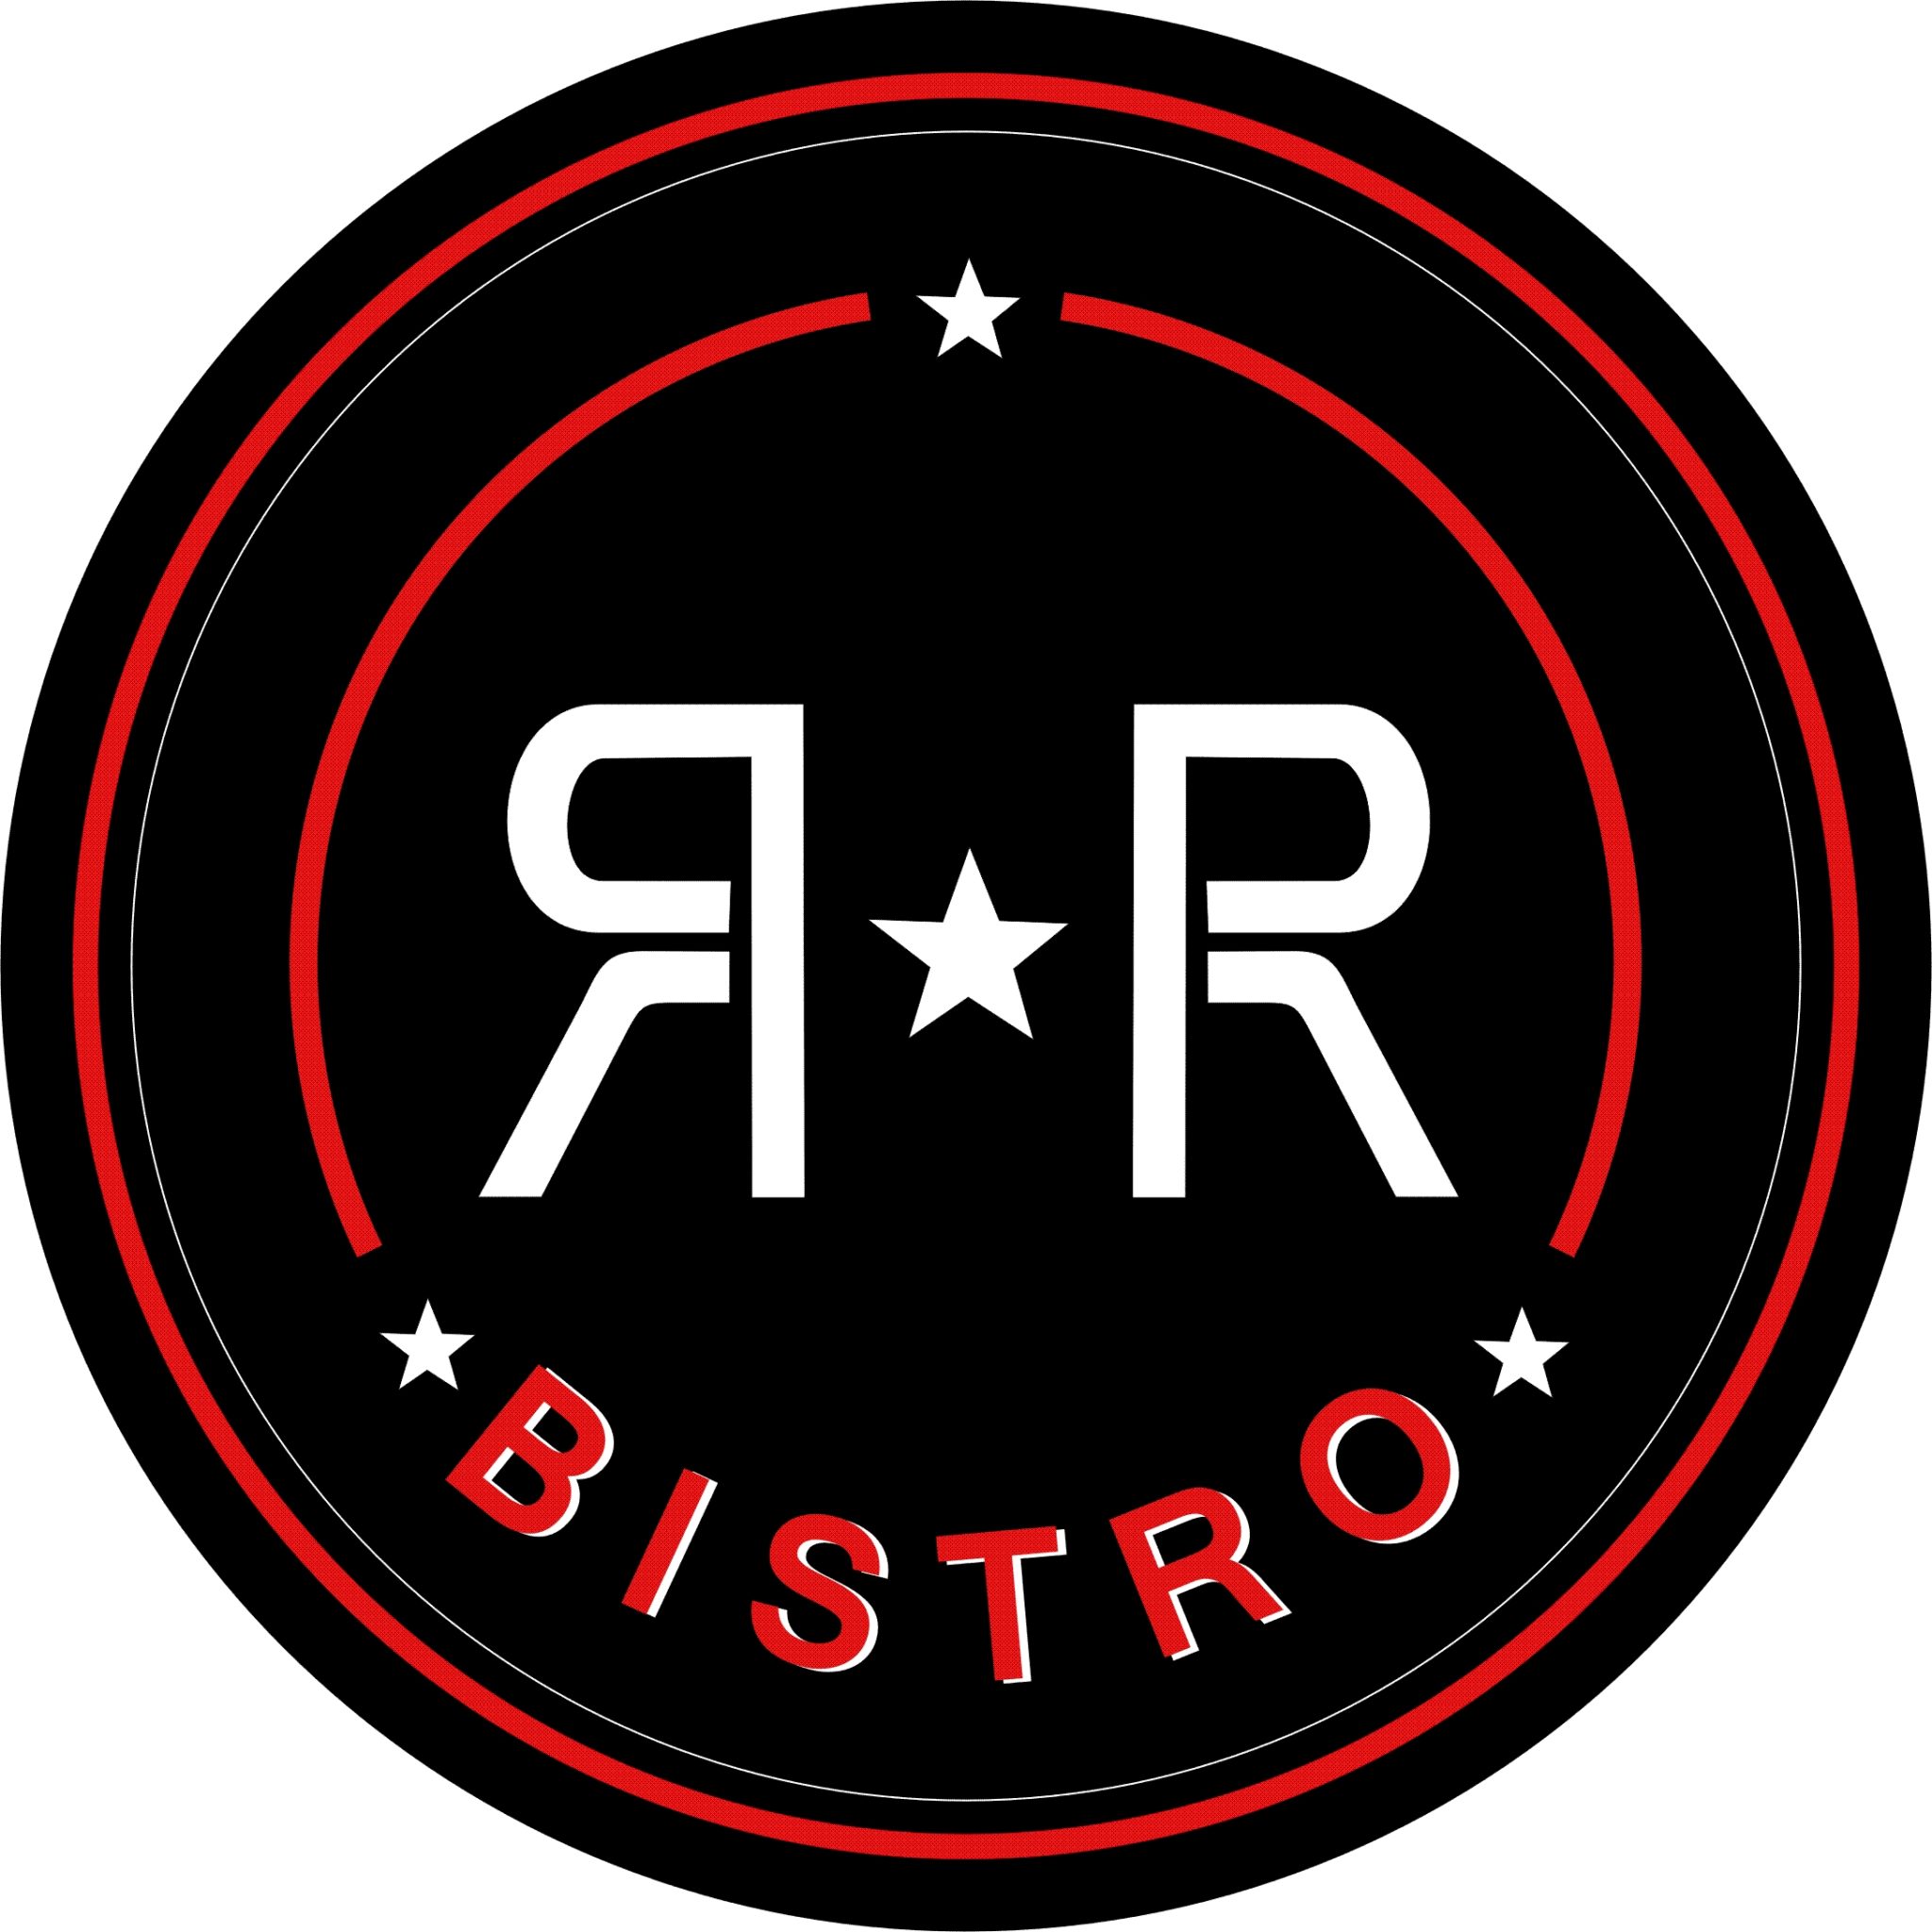 R&R Bistro – PLEASE NOTE NO CASH PAYMENTS-CARD PAYMENTS ONLY